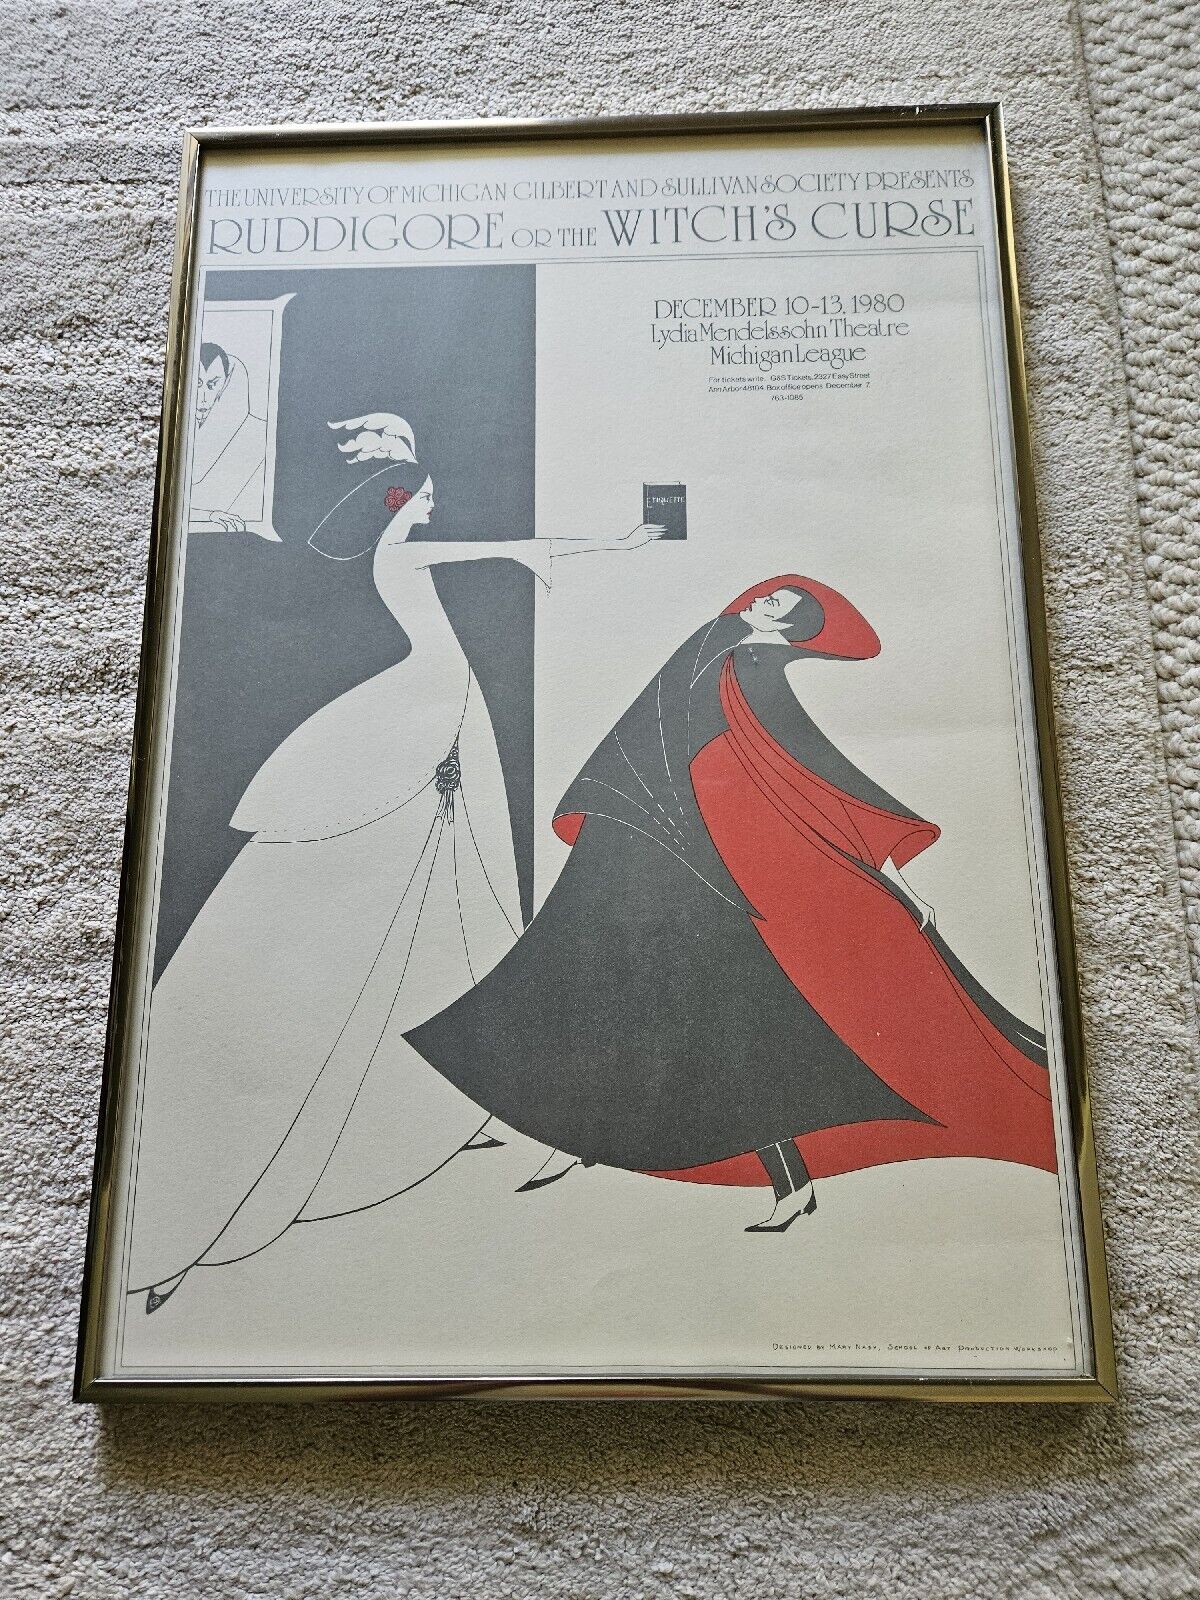 University Of Michigan Ruddigore Of The Witchs Curse Poster 1980 Framed Nash